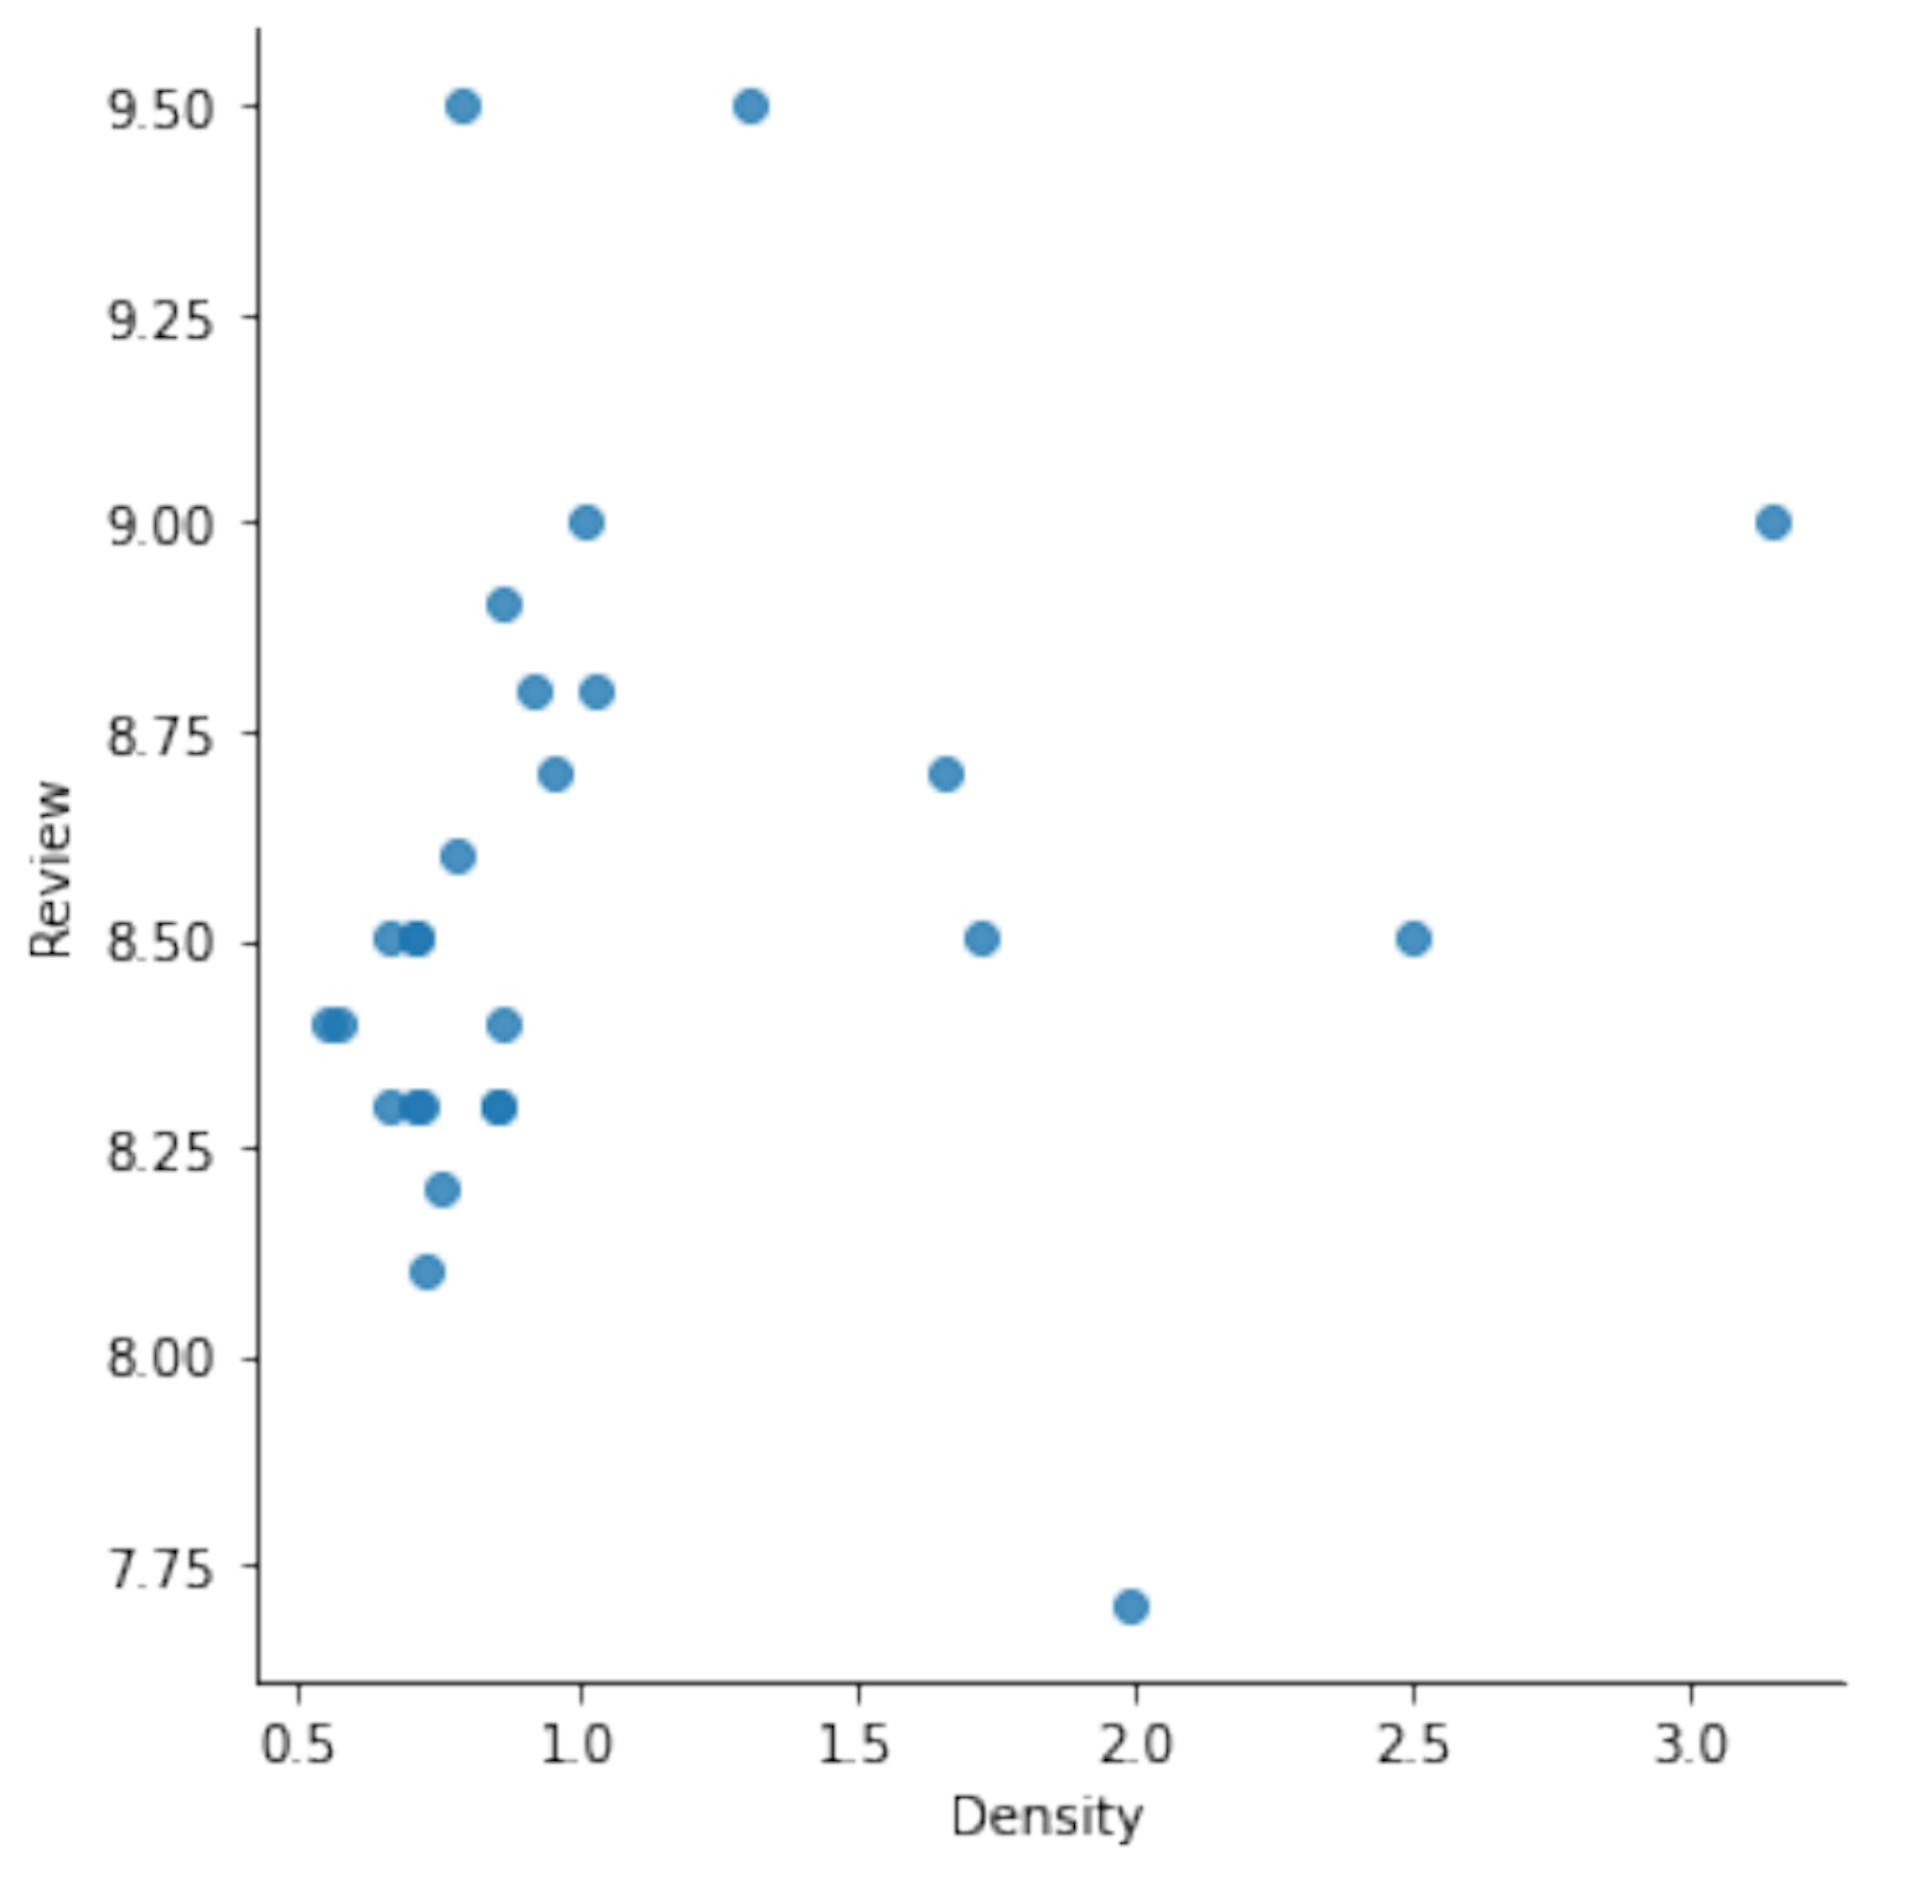 Fig. 6. Density vs Review for House of Cards